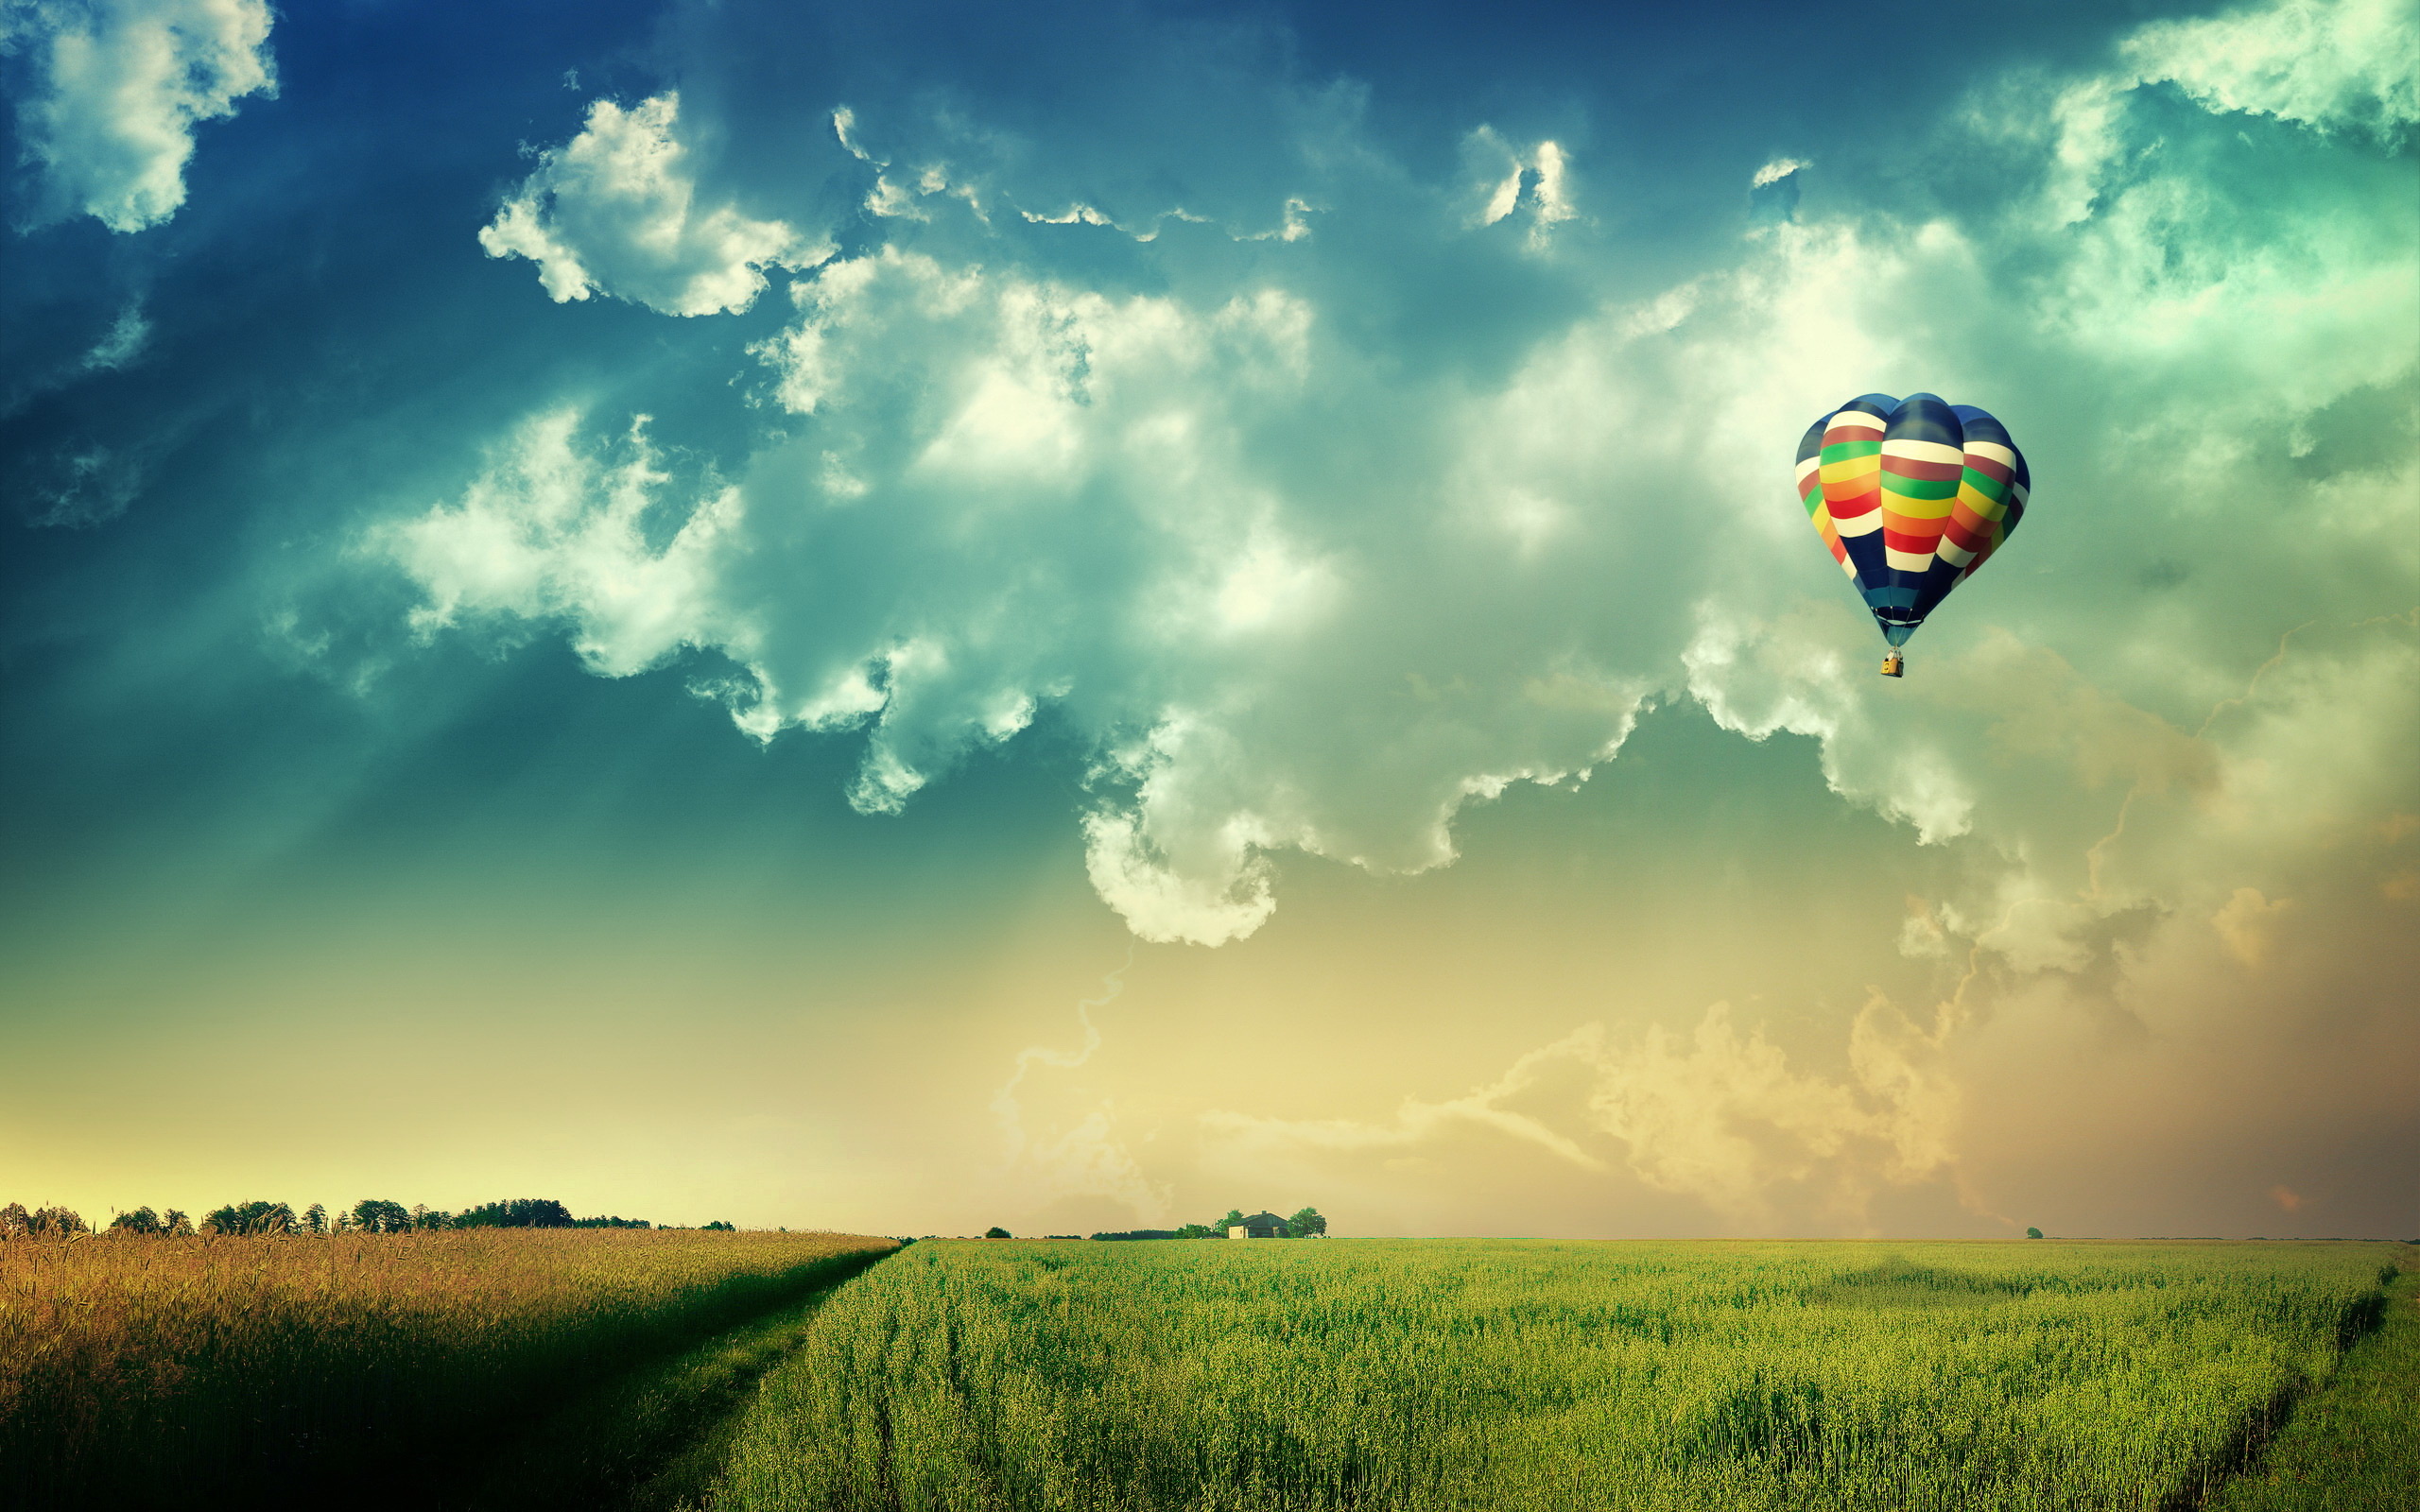 Air Sports: Floating aircraft with aerostat in stormy weather in clouds over a field. 2560x1600 HD Wallpaper.